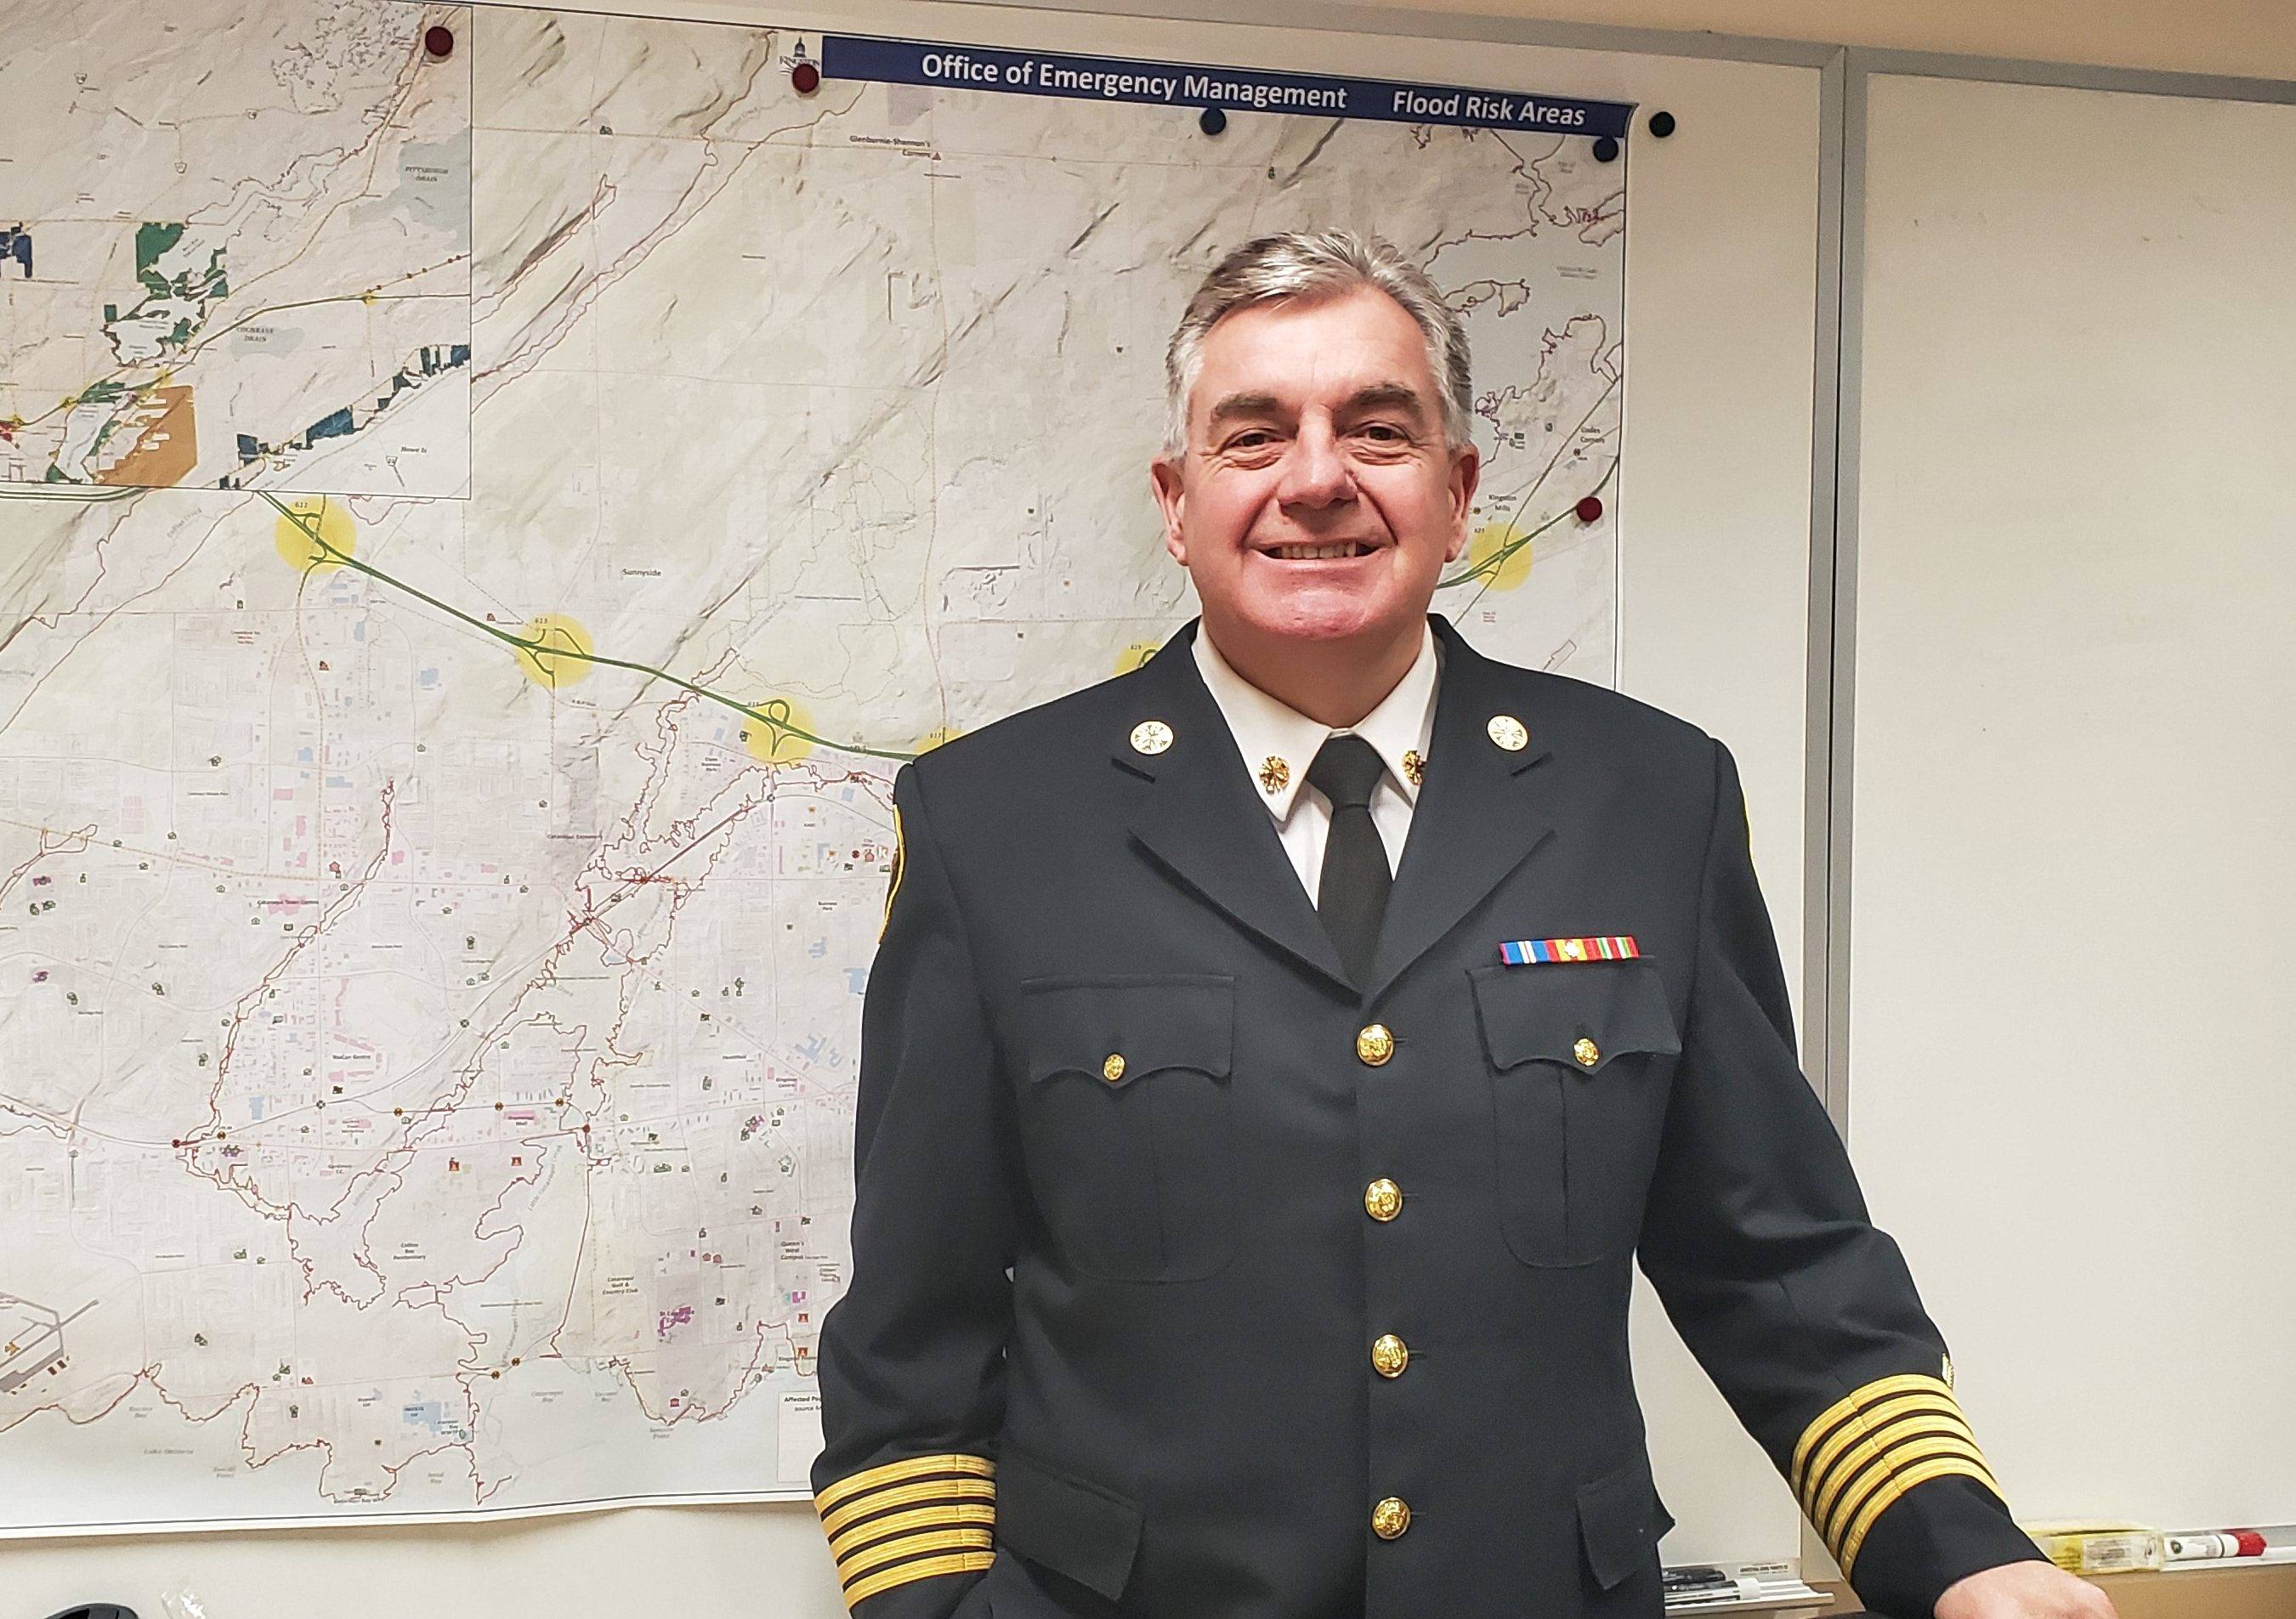 Kingston fire chief talks climate change, mental health and hopes for the city’s future